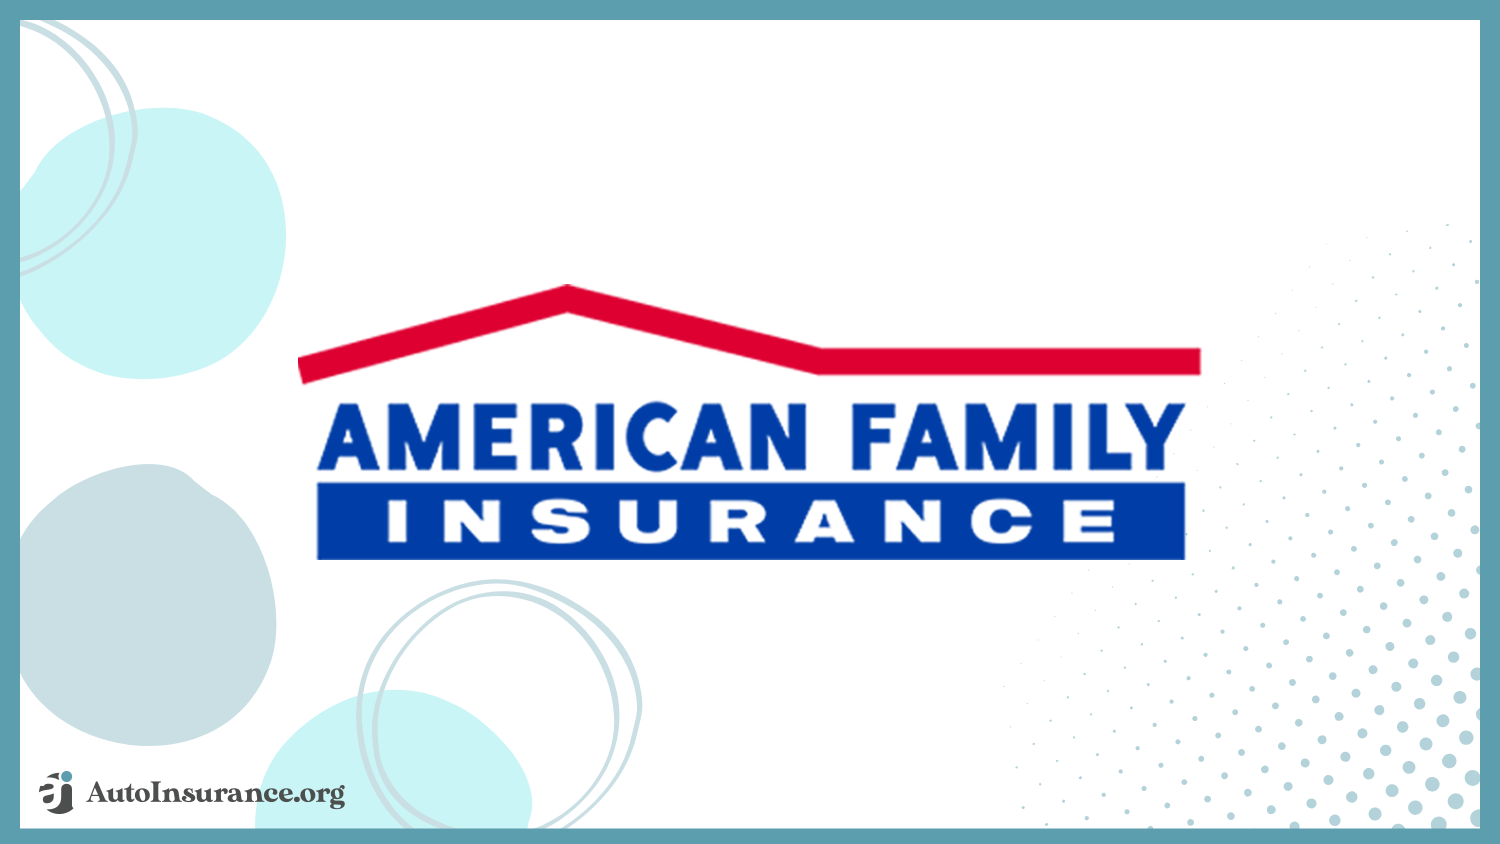 American Family best companies for bundling home and auto insurance